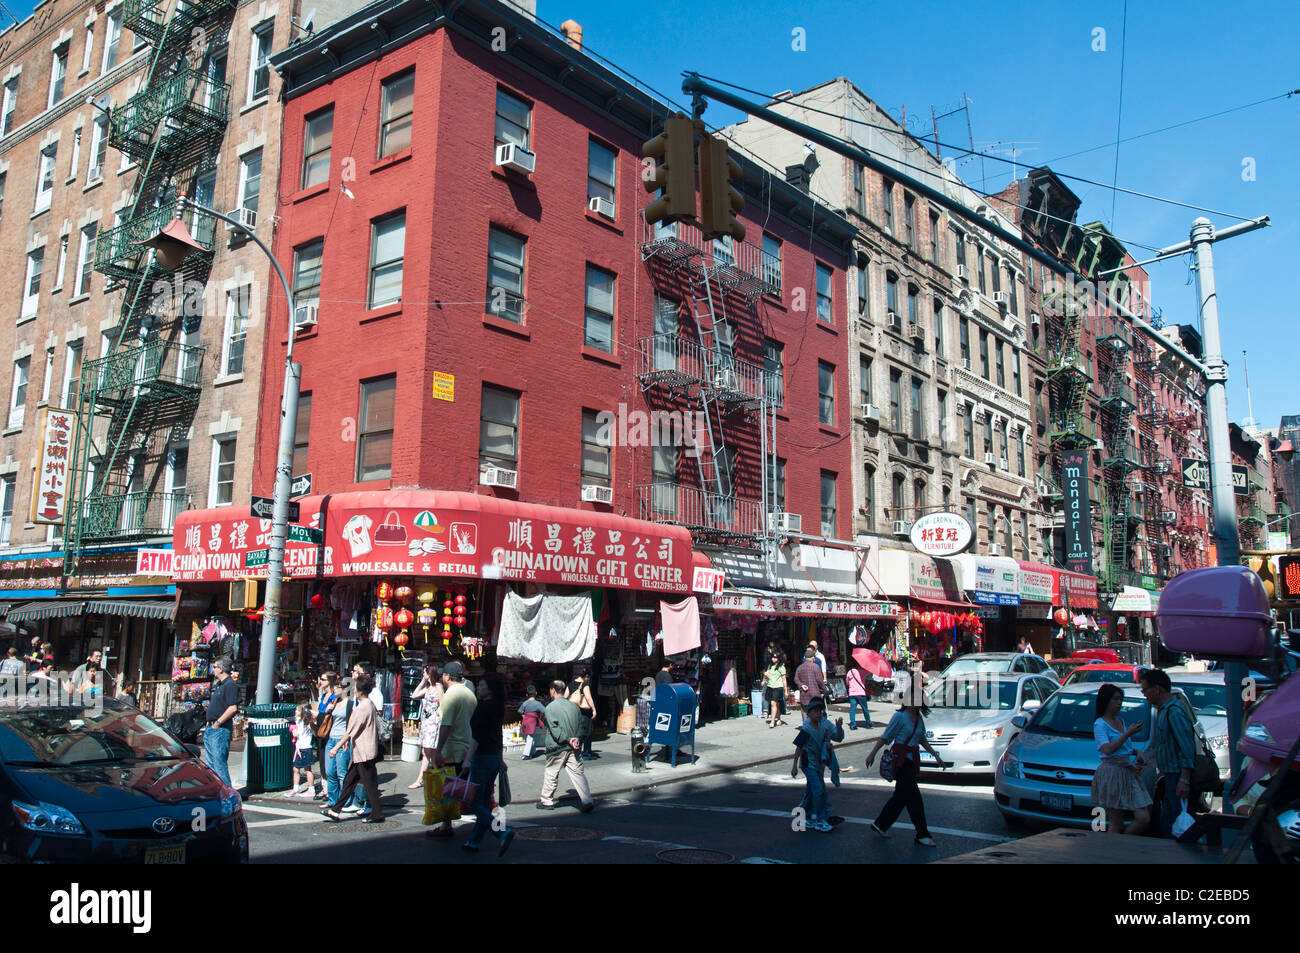 A tourist gift shop, Chinatown, New York City with many souvenir items for  sale Stock Photo - Alamy